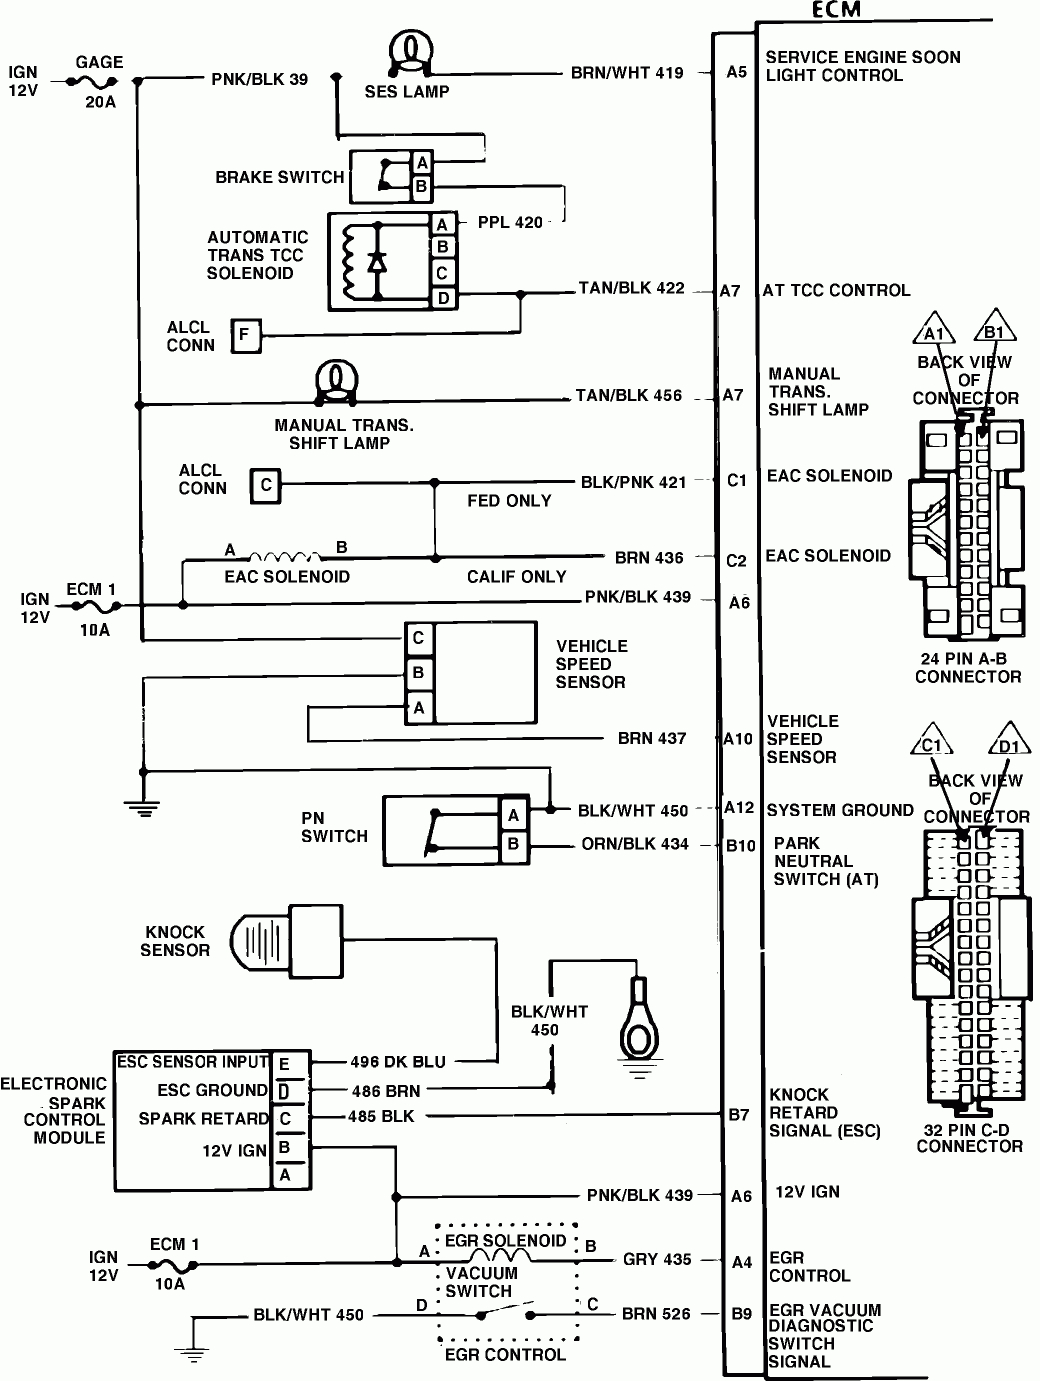 2001 S10 Pickup Wiring Harness Diagrams - Wiring Diagram Detailed - S10 Wiring Harness Diagram